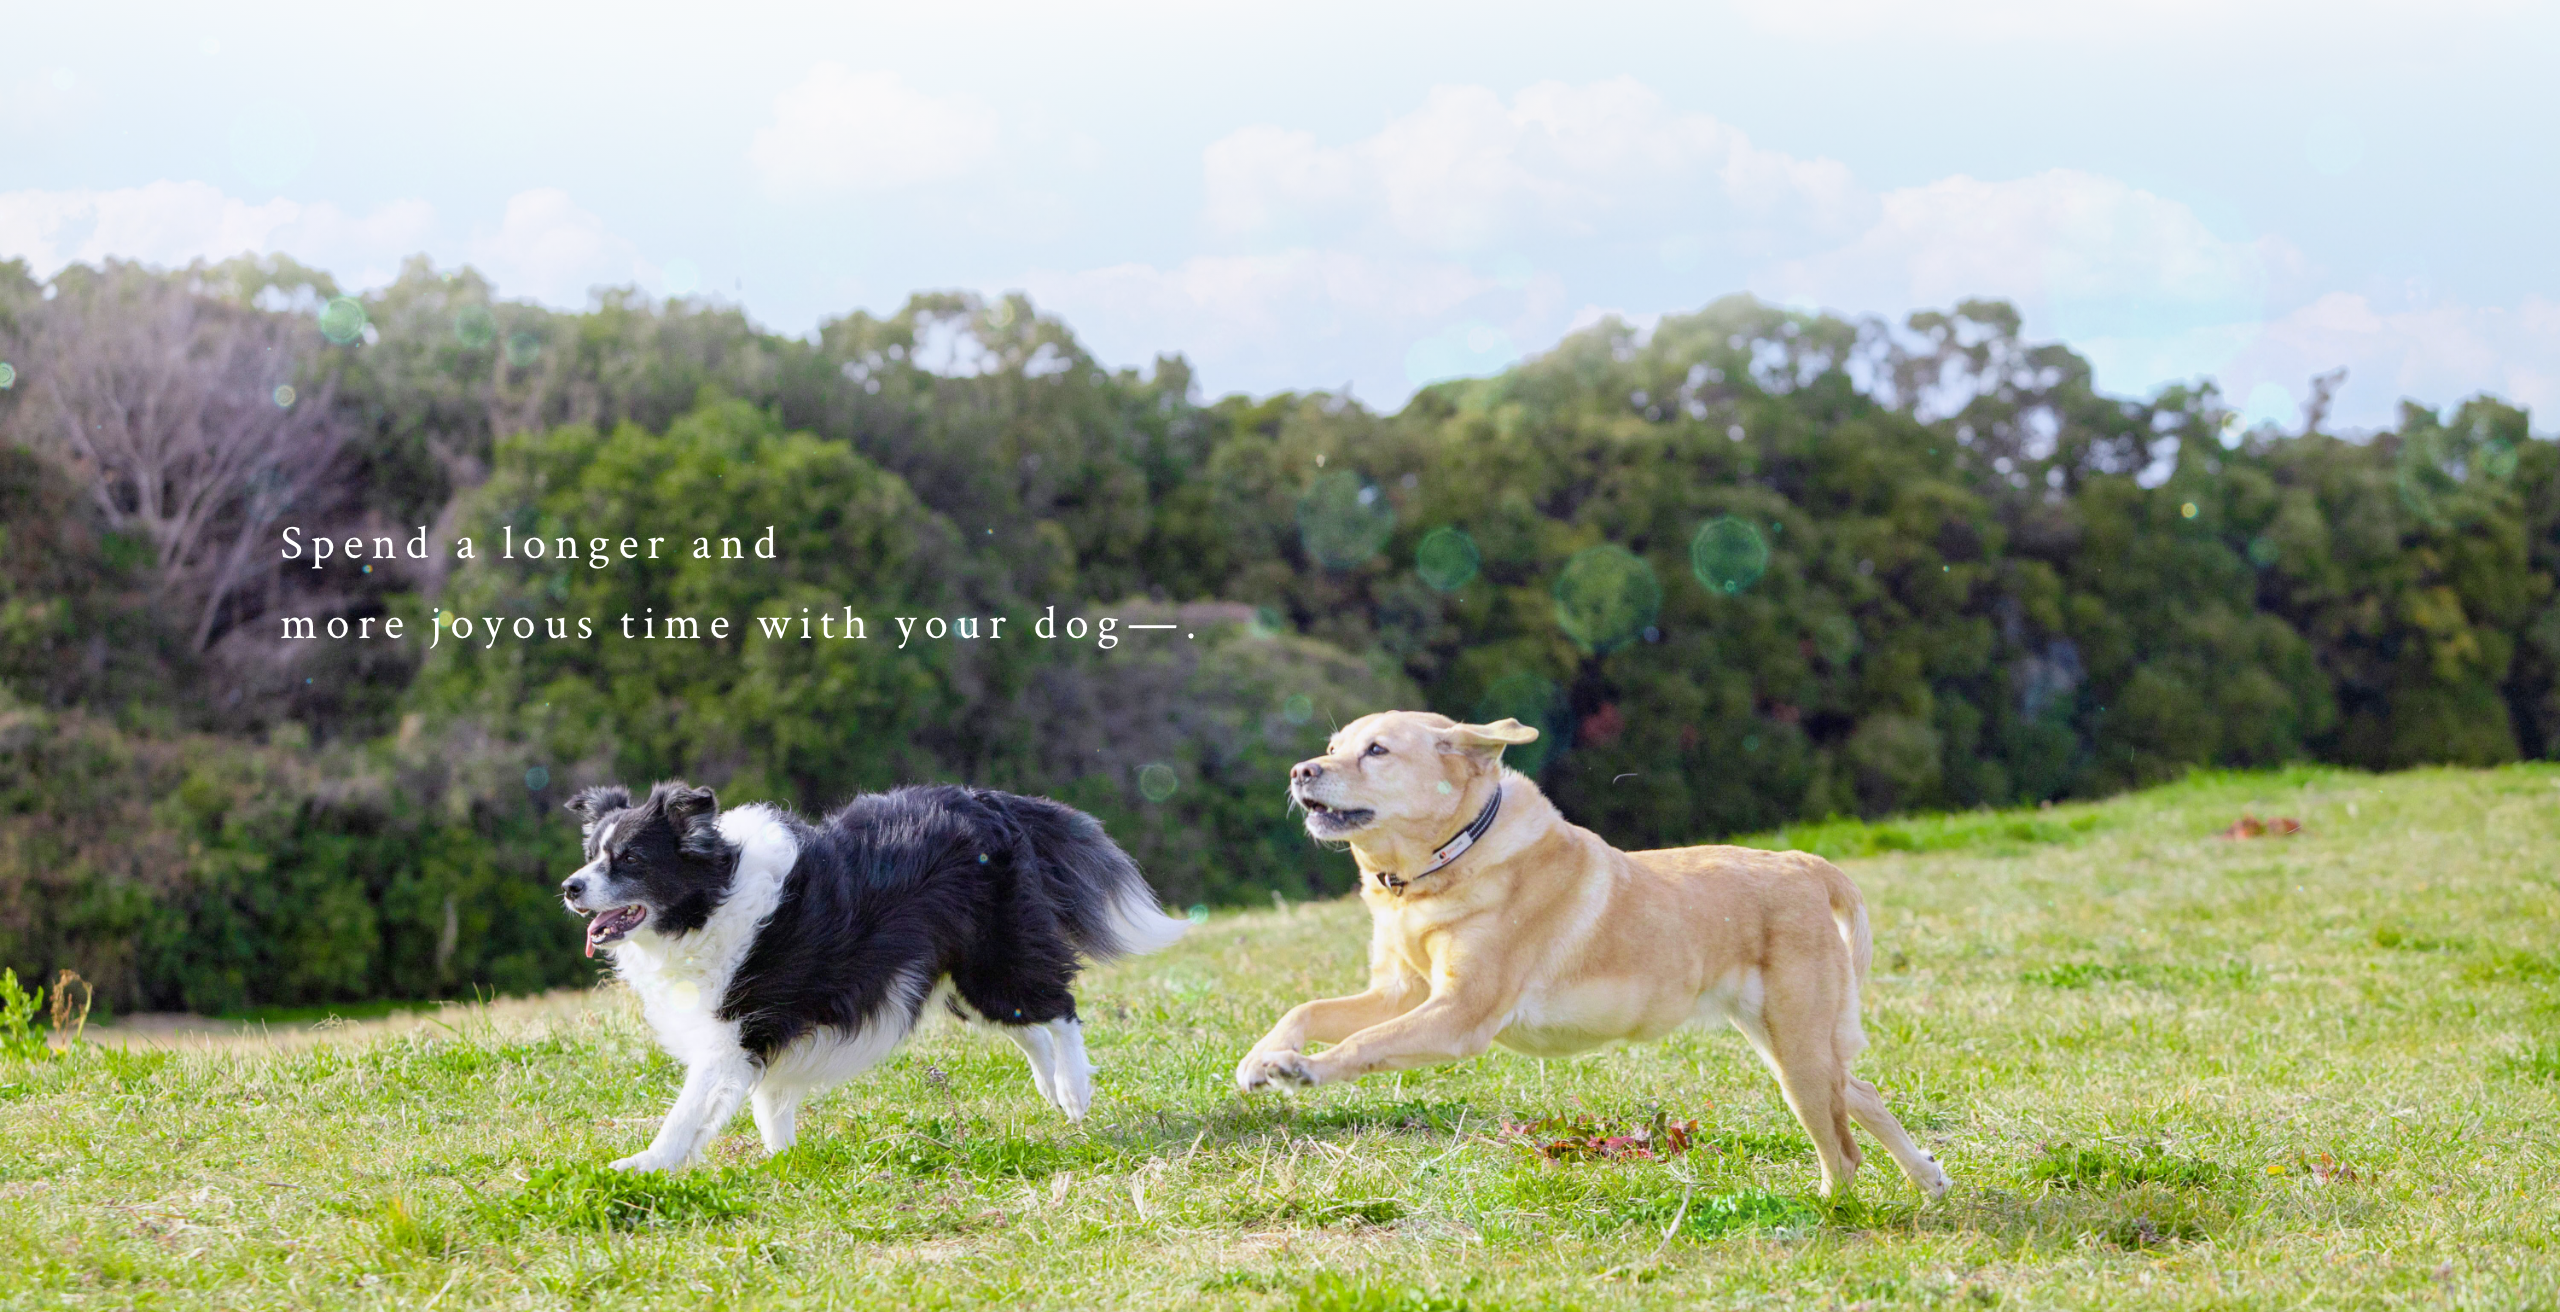 Spend a longer and more joyous time with your dog―.